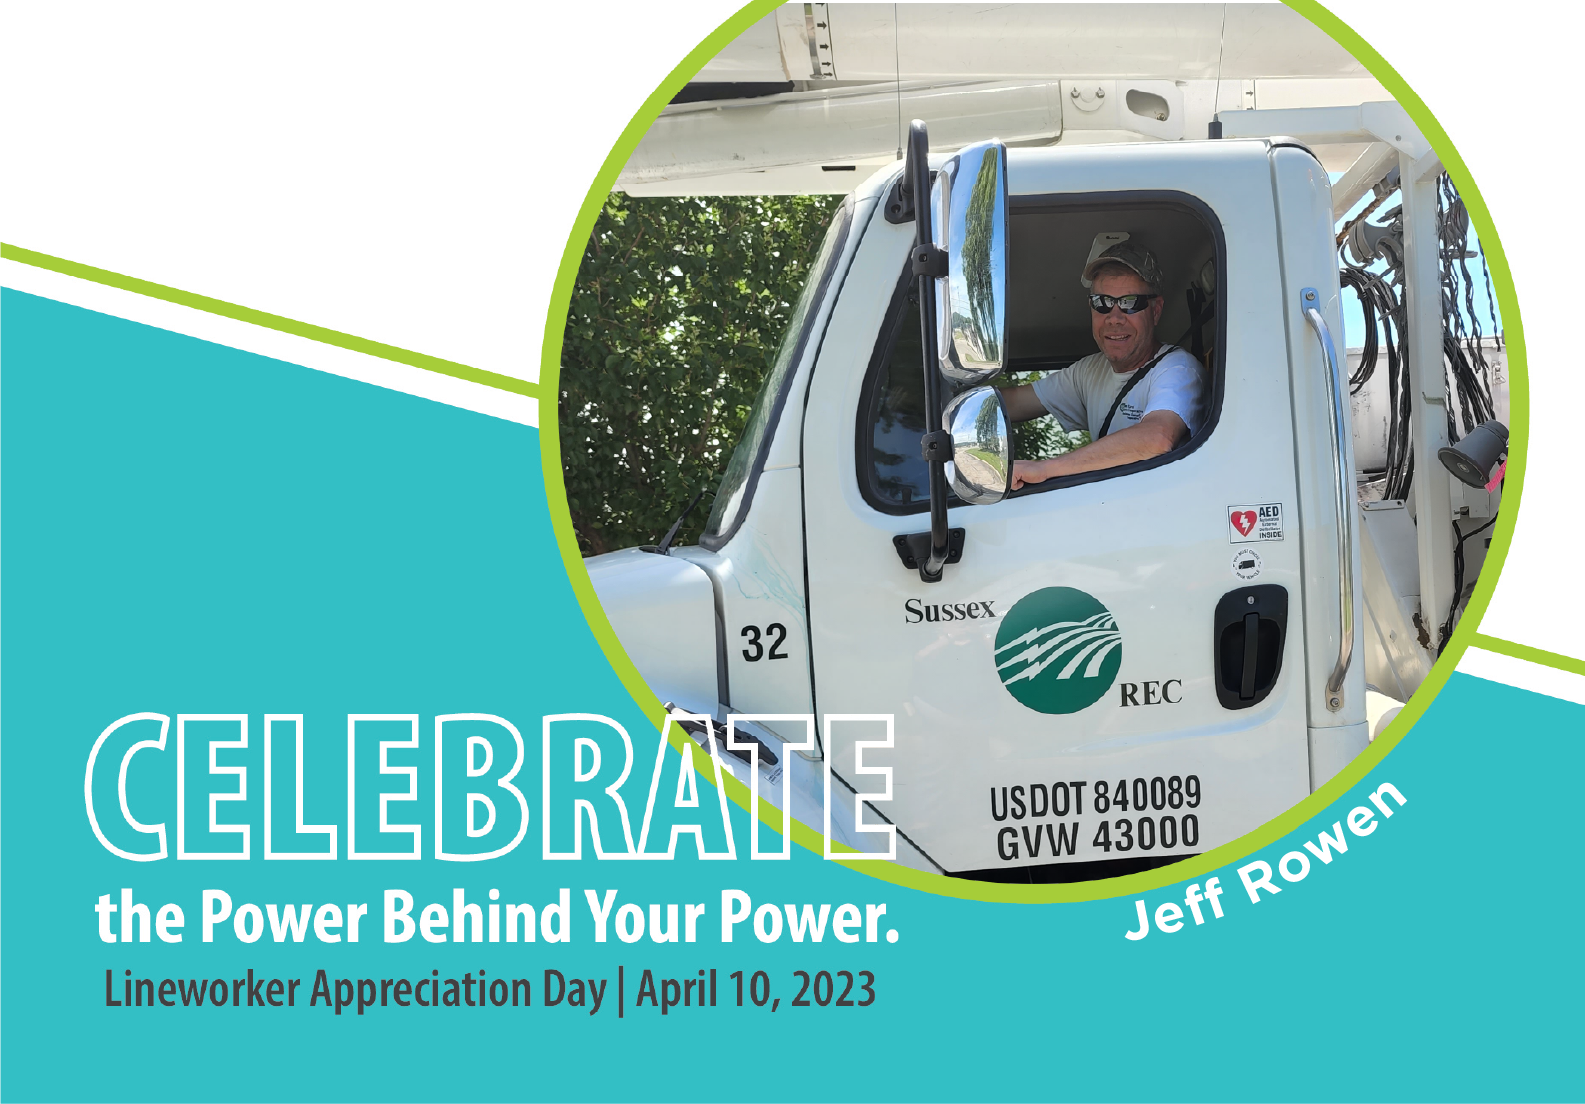 Pictured: A blue and white frame that reads "CELEBRATE the Power Behind Your Power. Lineworker Appreciation Day | April 10, 2023." The photo in this frame shows Sussex REC Chief Lineman Jeff Rowen